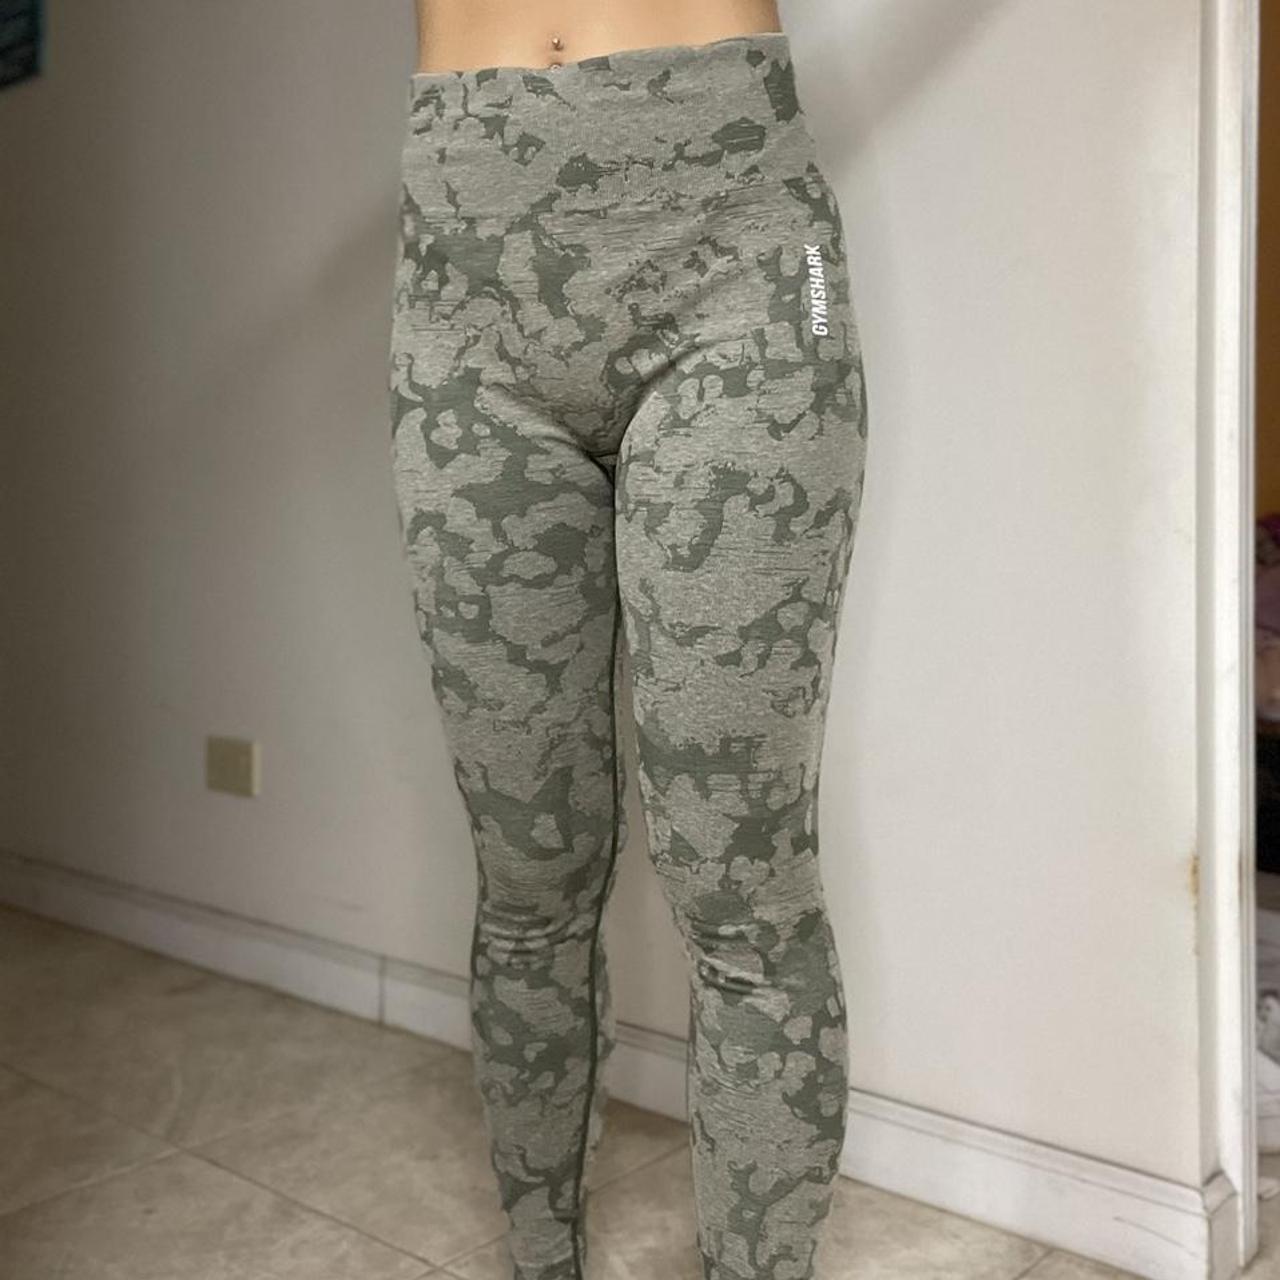 grey camo leggings brand: mipaws worn once only - Depop